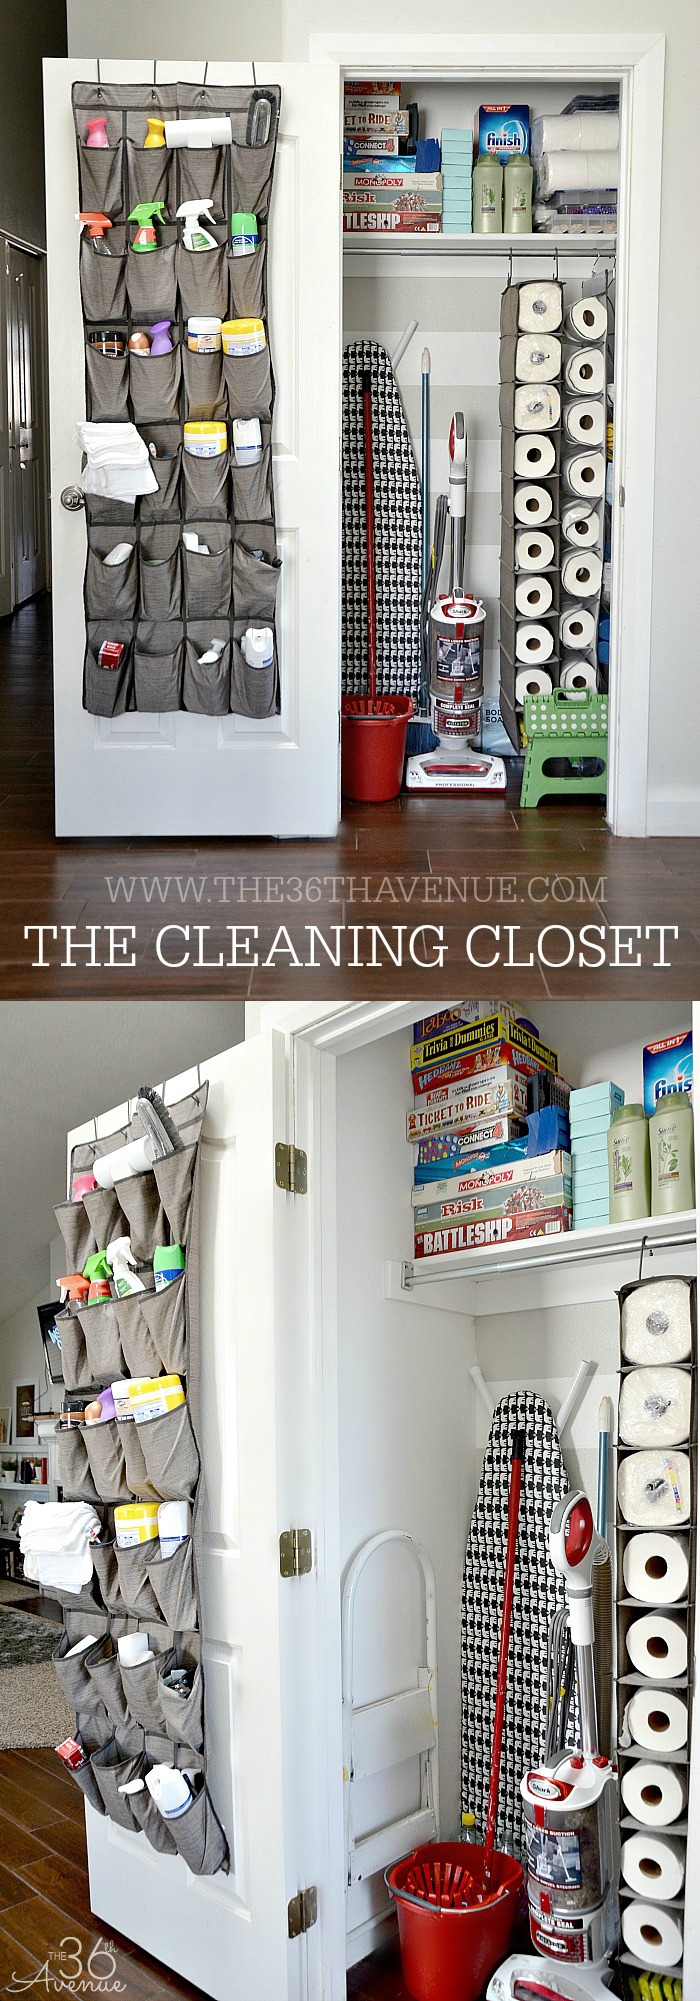 https://www.the36thavenue.com/wp-content/uploads/2015/05/Cleaning-Tips-The-Cleaning-Closet-at-the36thavenue.com-.jpg